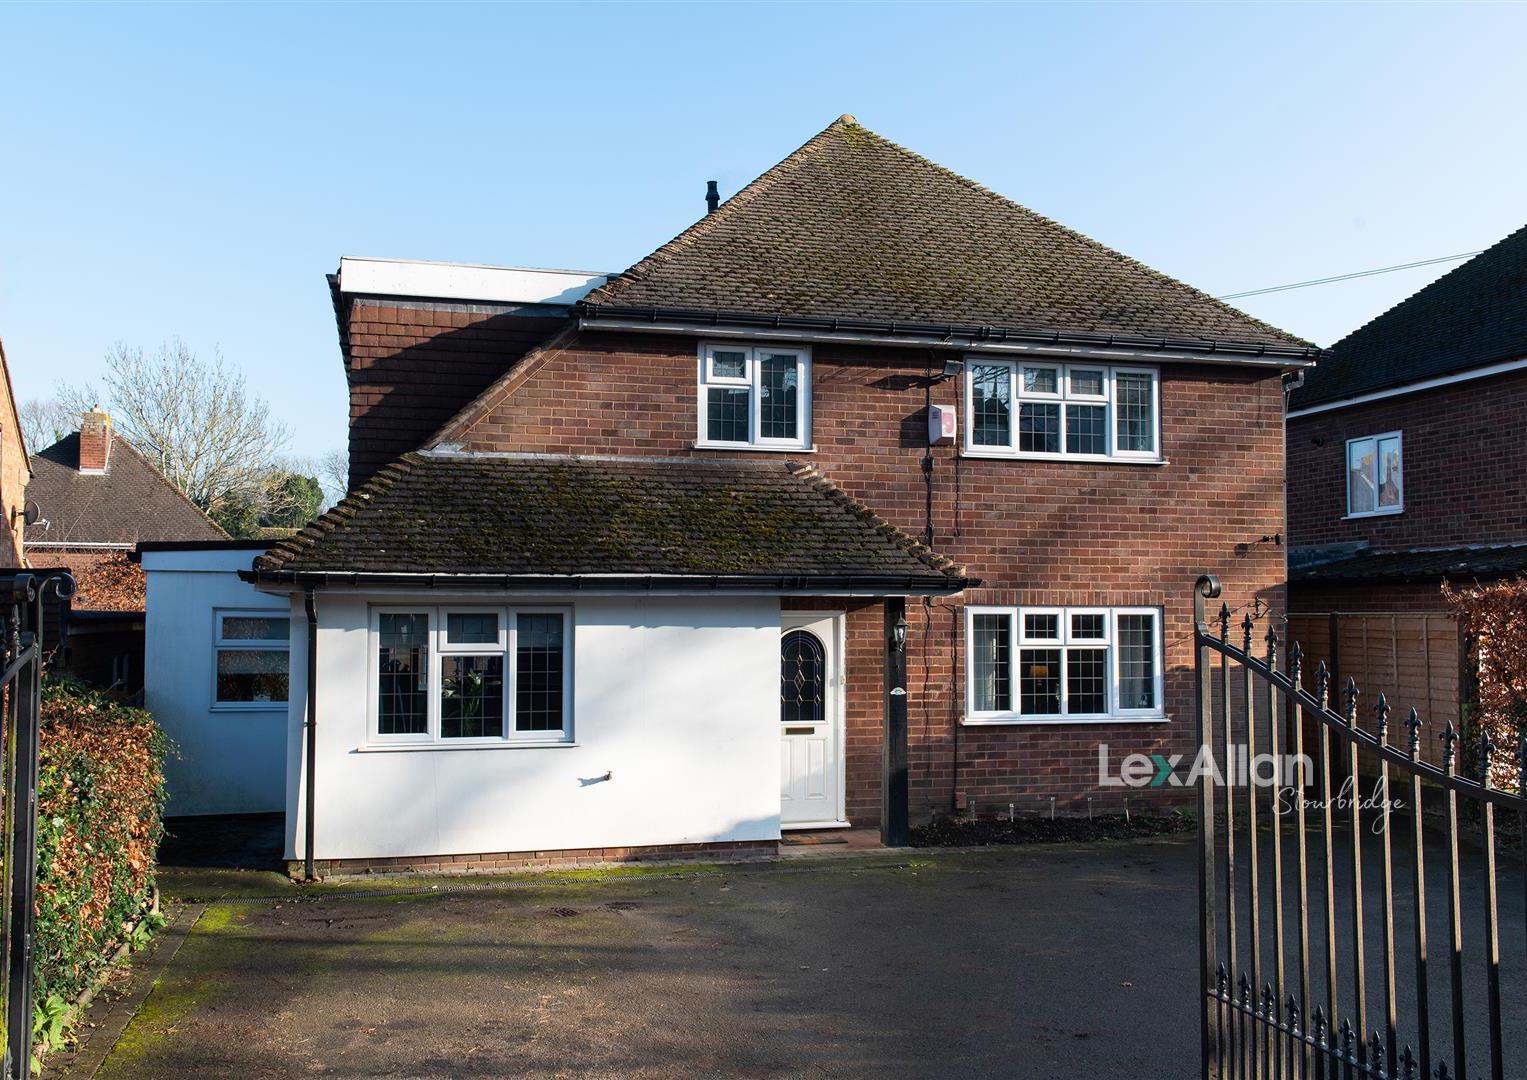 4 bed detached house for sale in Church Road, Stourbridge, DY8 